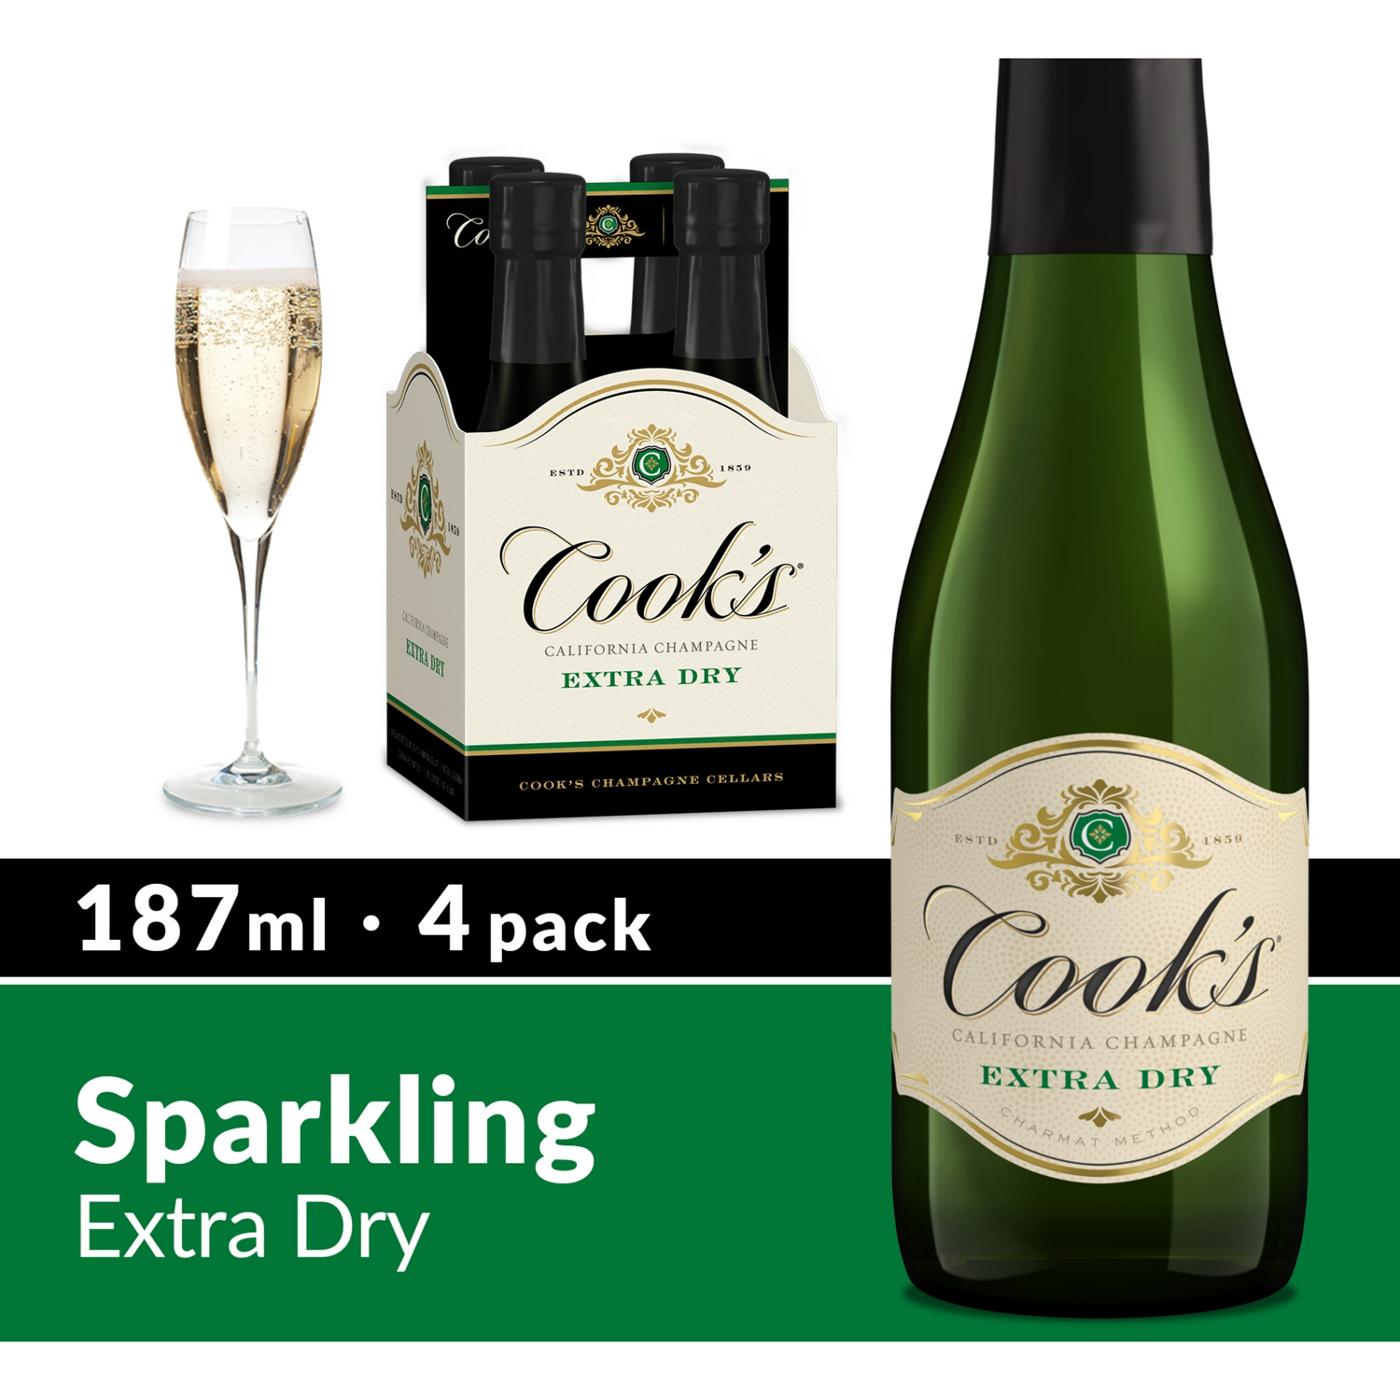 Cook's California Champagne Extra Dry White Sparkling Wine 187 mL Bottles; image 2 of 7